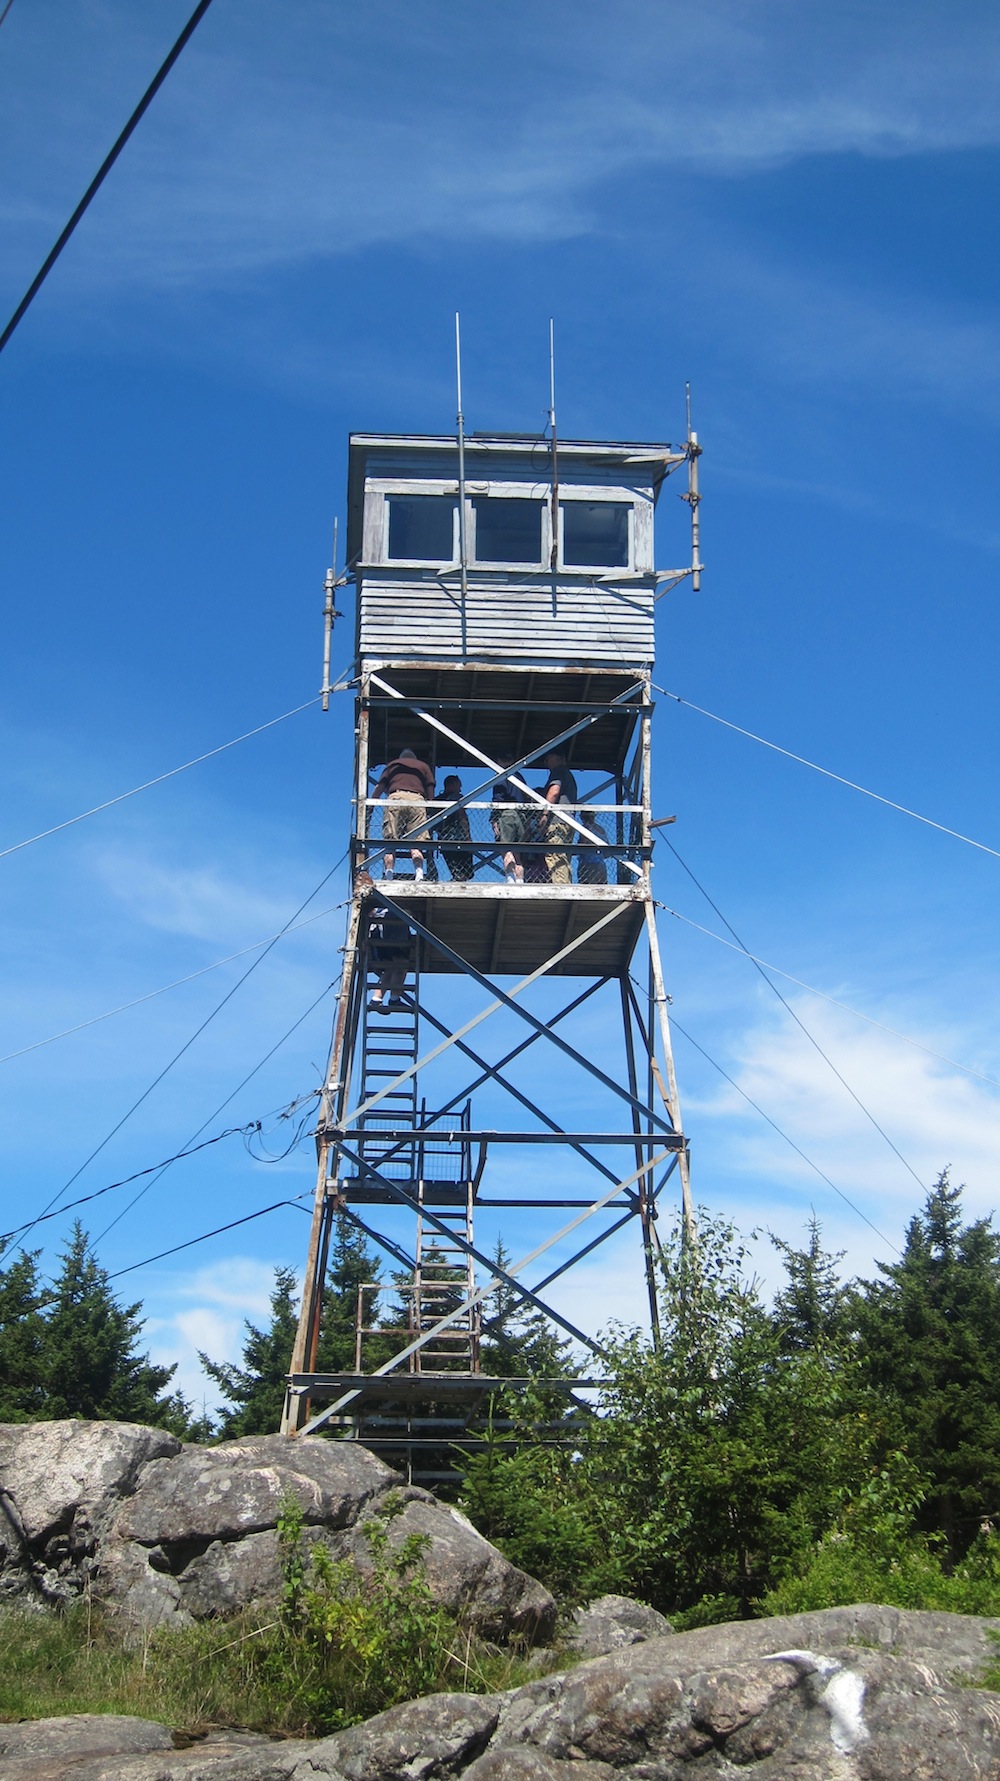 Here's the Belknap fire tower. You can see people that crowded the platform where I did my SOTA activation. They came up after I was finished.